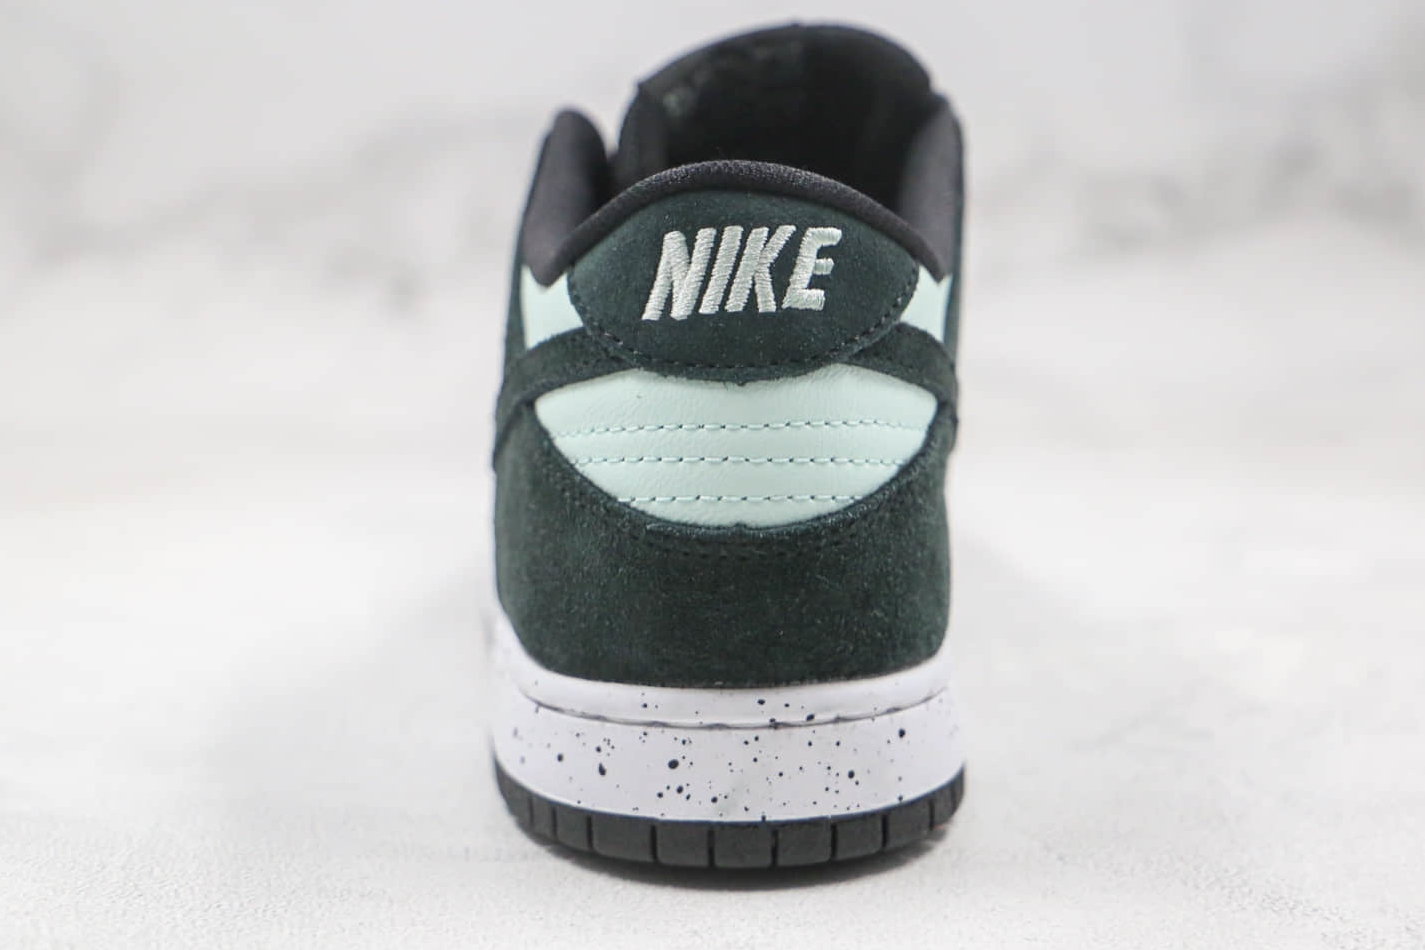 Nike Zoom Dunk Low Pro SB 'Barely Green' 854866-003 – Buy Online at [Website Name]